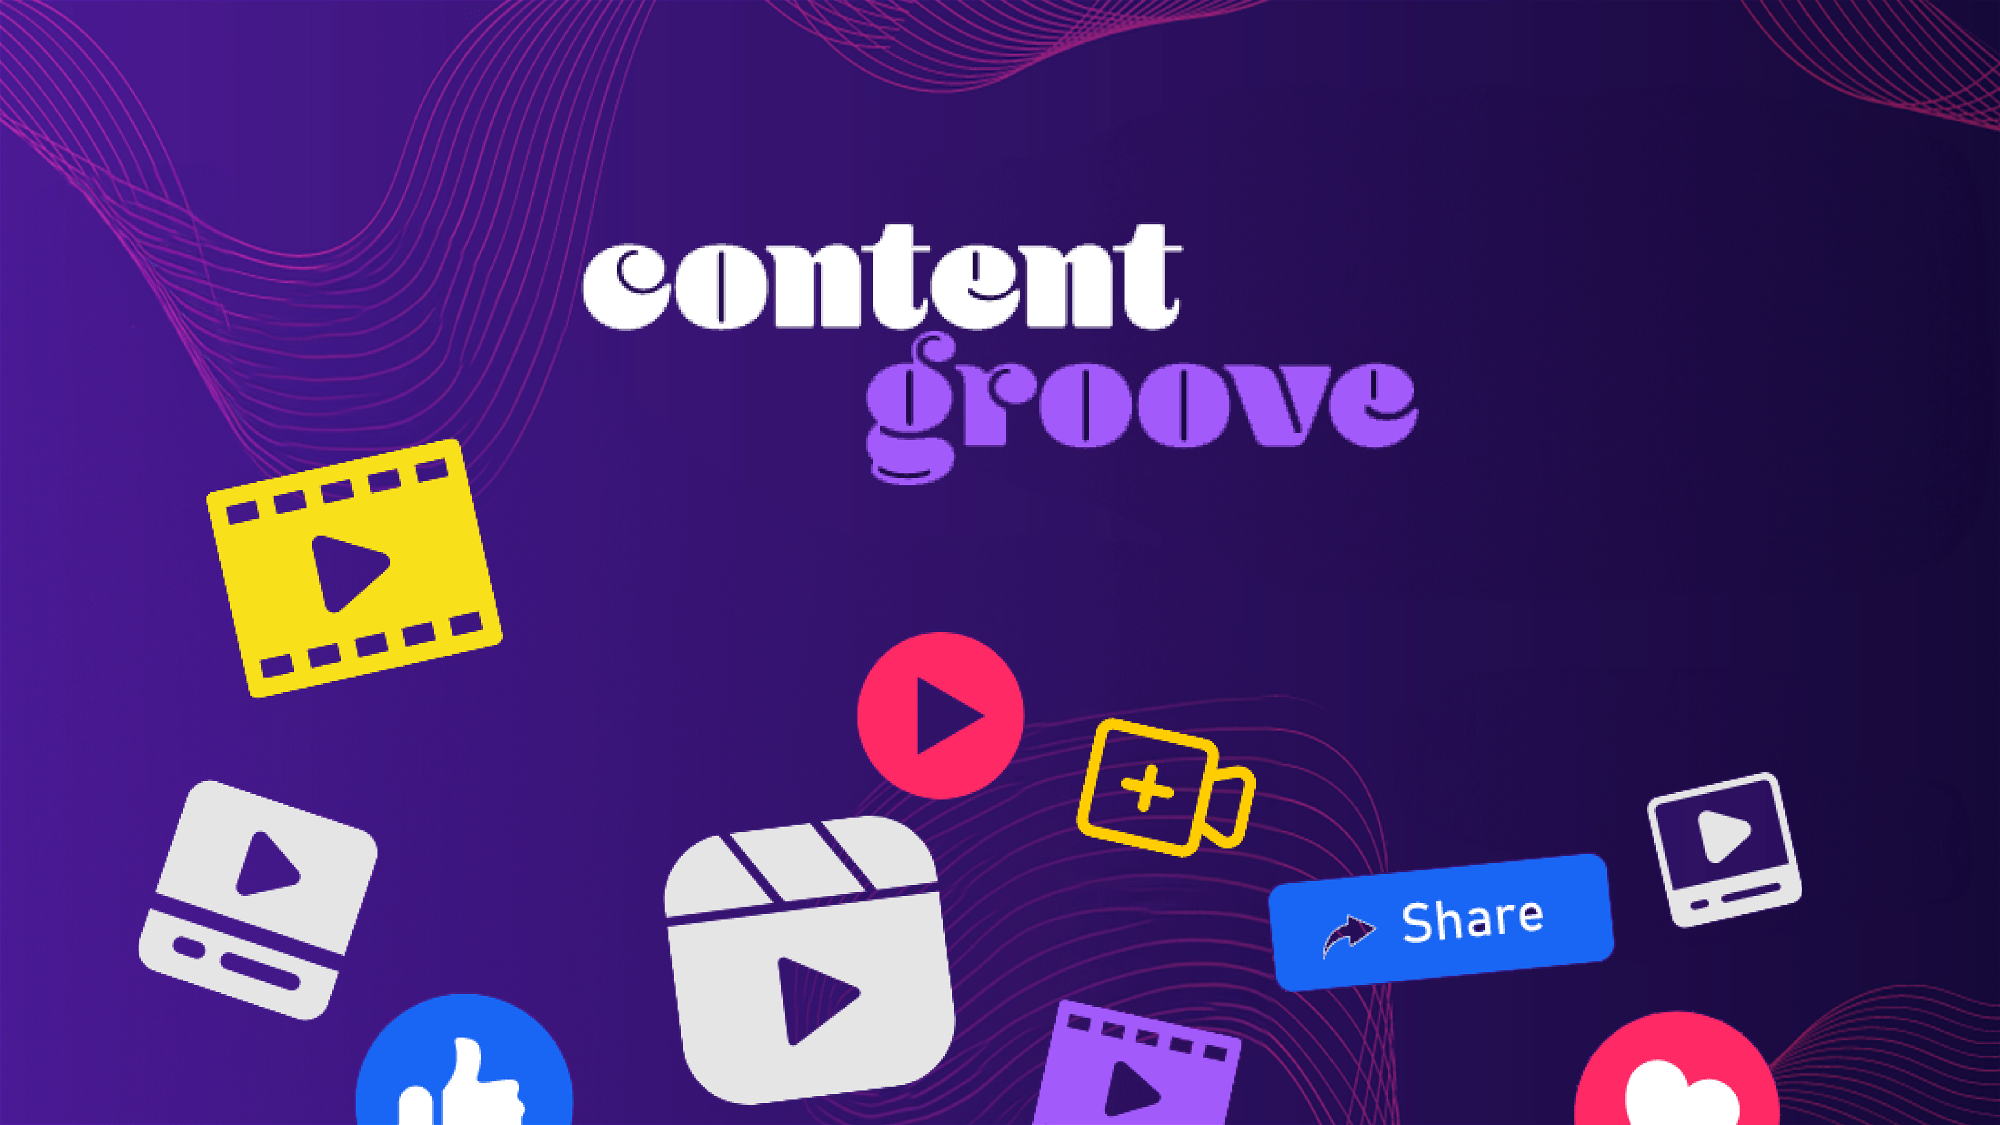 ContentGroove – Trim content into shareable clips